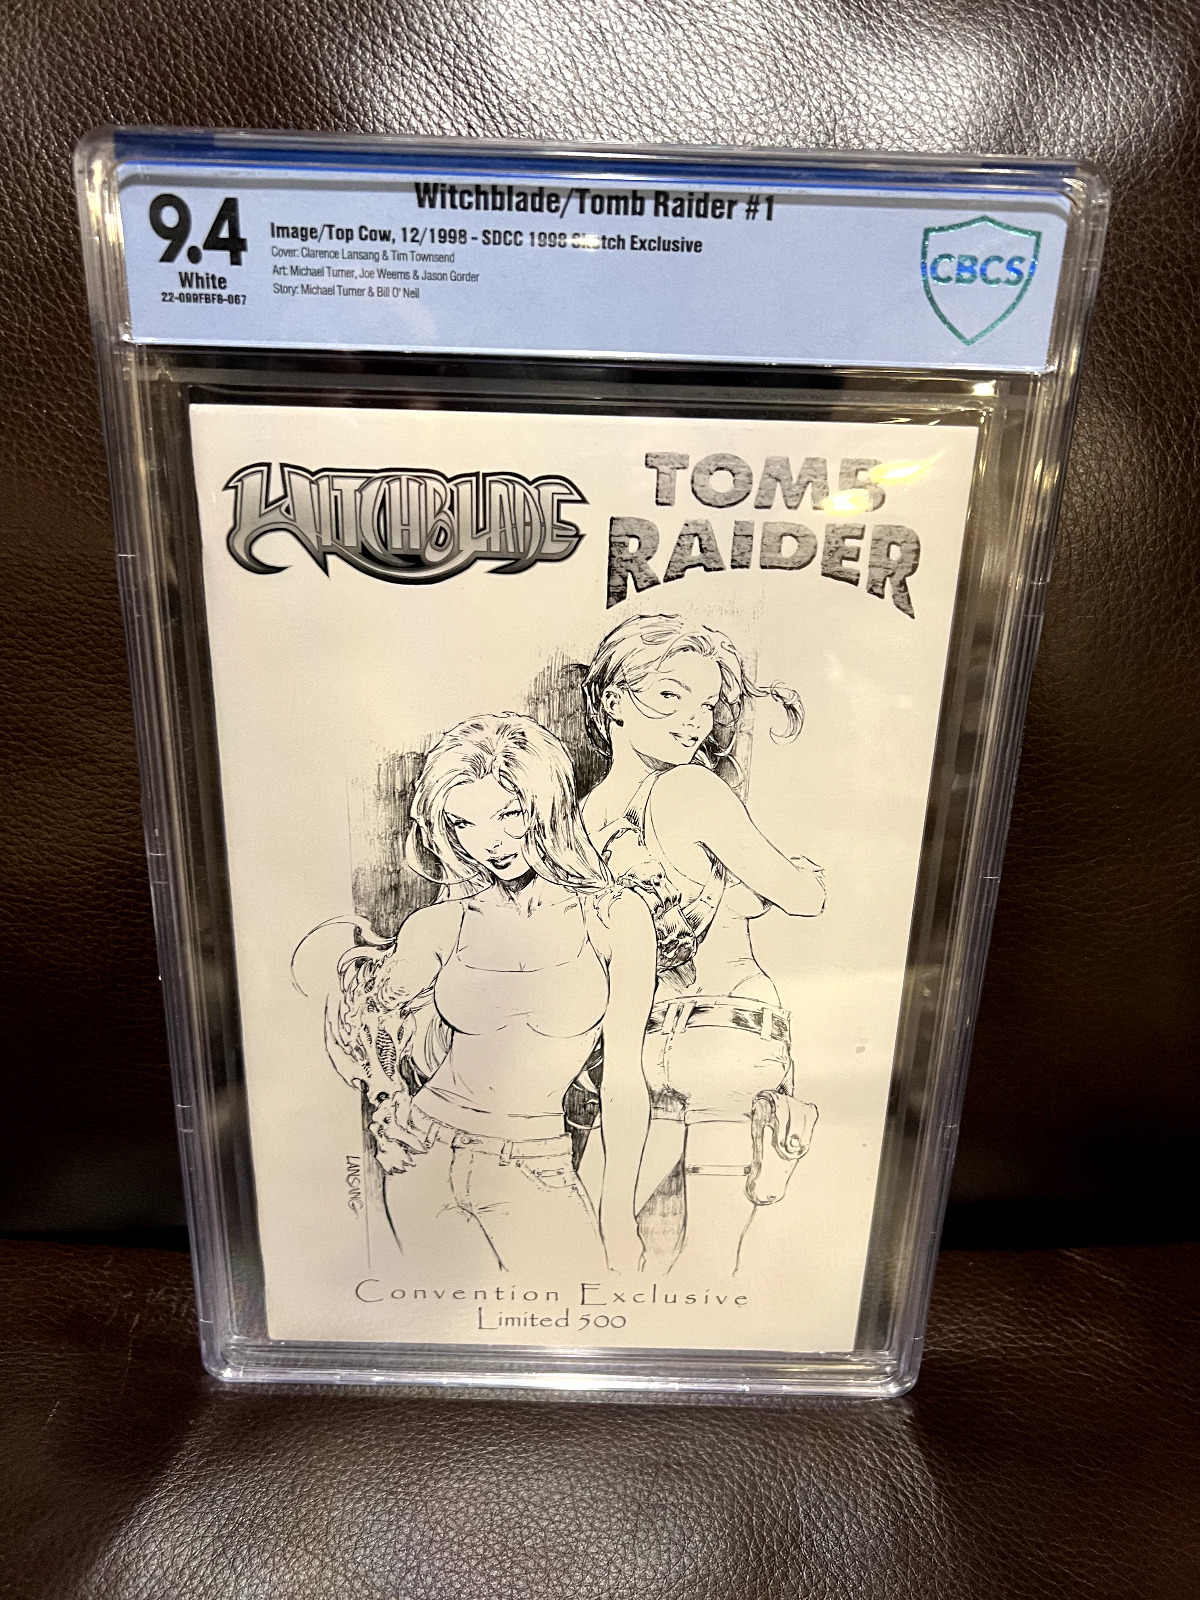 Witchblade/Tomb Raider #1 CBCS/CGC 9.4 Sketch Convention Exclusive LIMITED 500